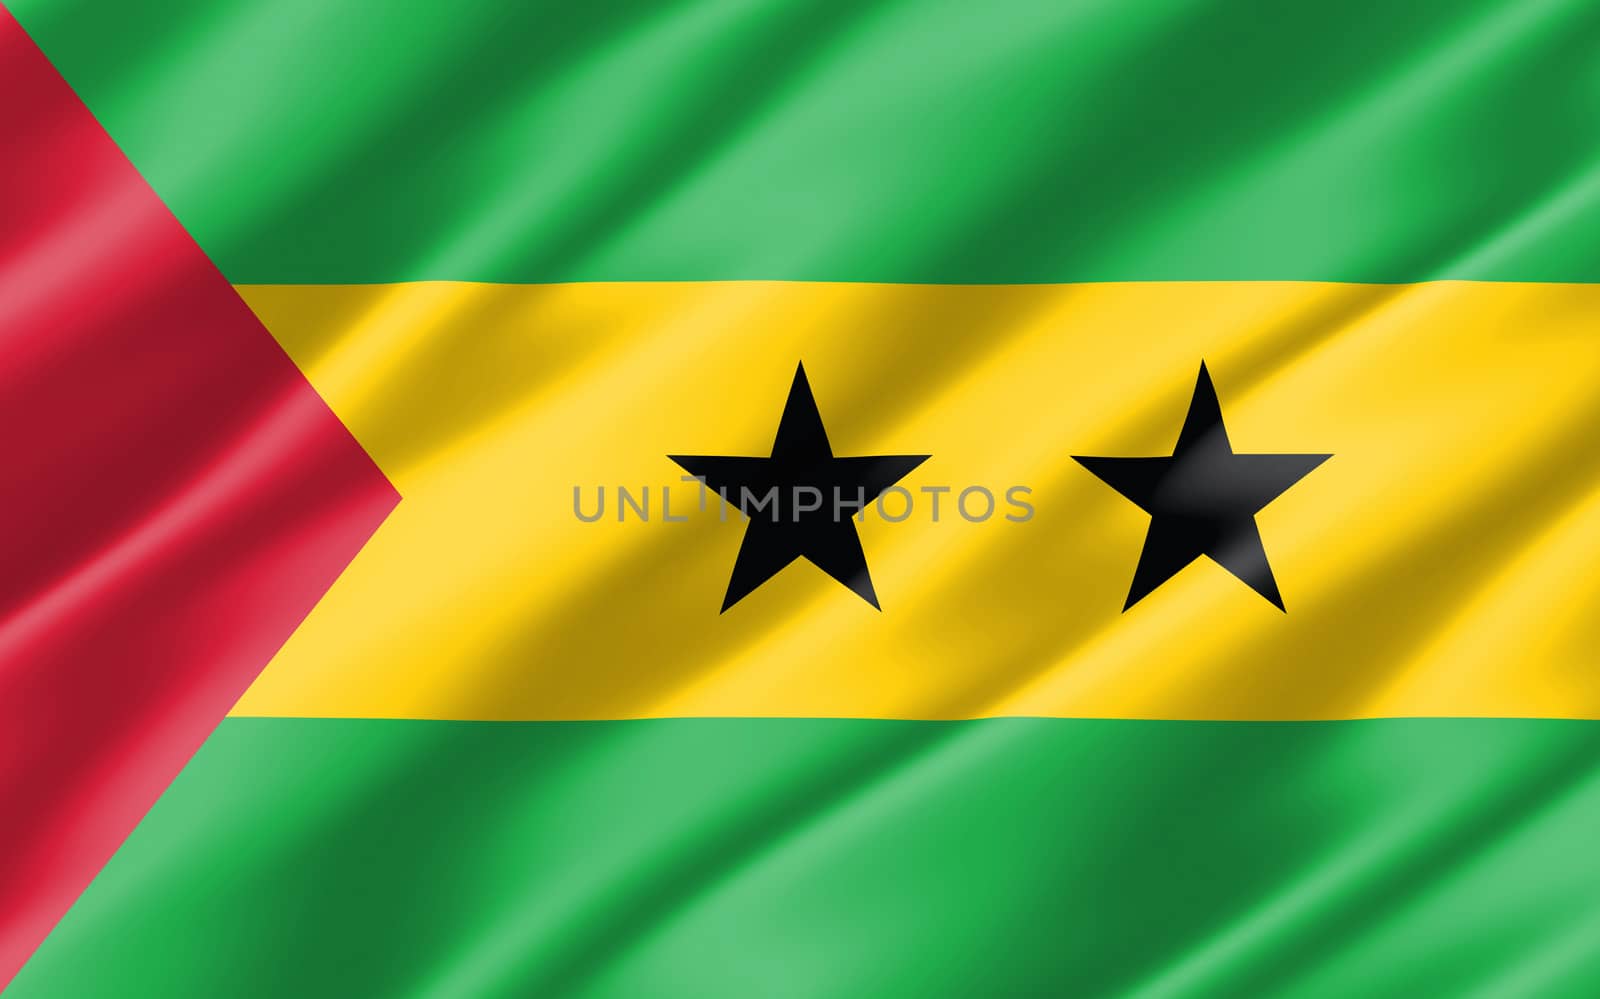 Silk wavy flag of Sao Tome and Principe graphic. Wavy Sao Tomean flag 3D illustration. Rippled Sao Tome and Principe country flag is a symbol of freedom, patriotism and independence.